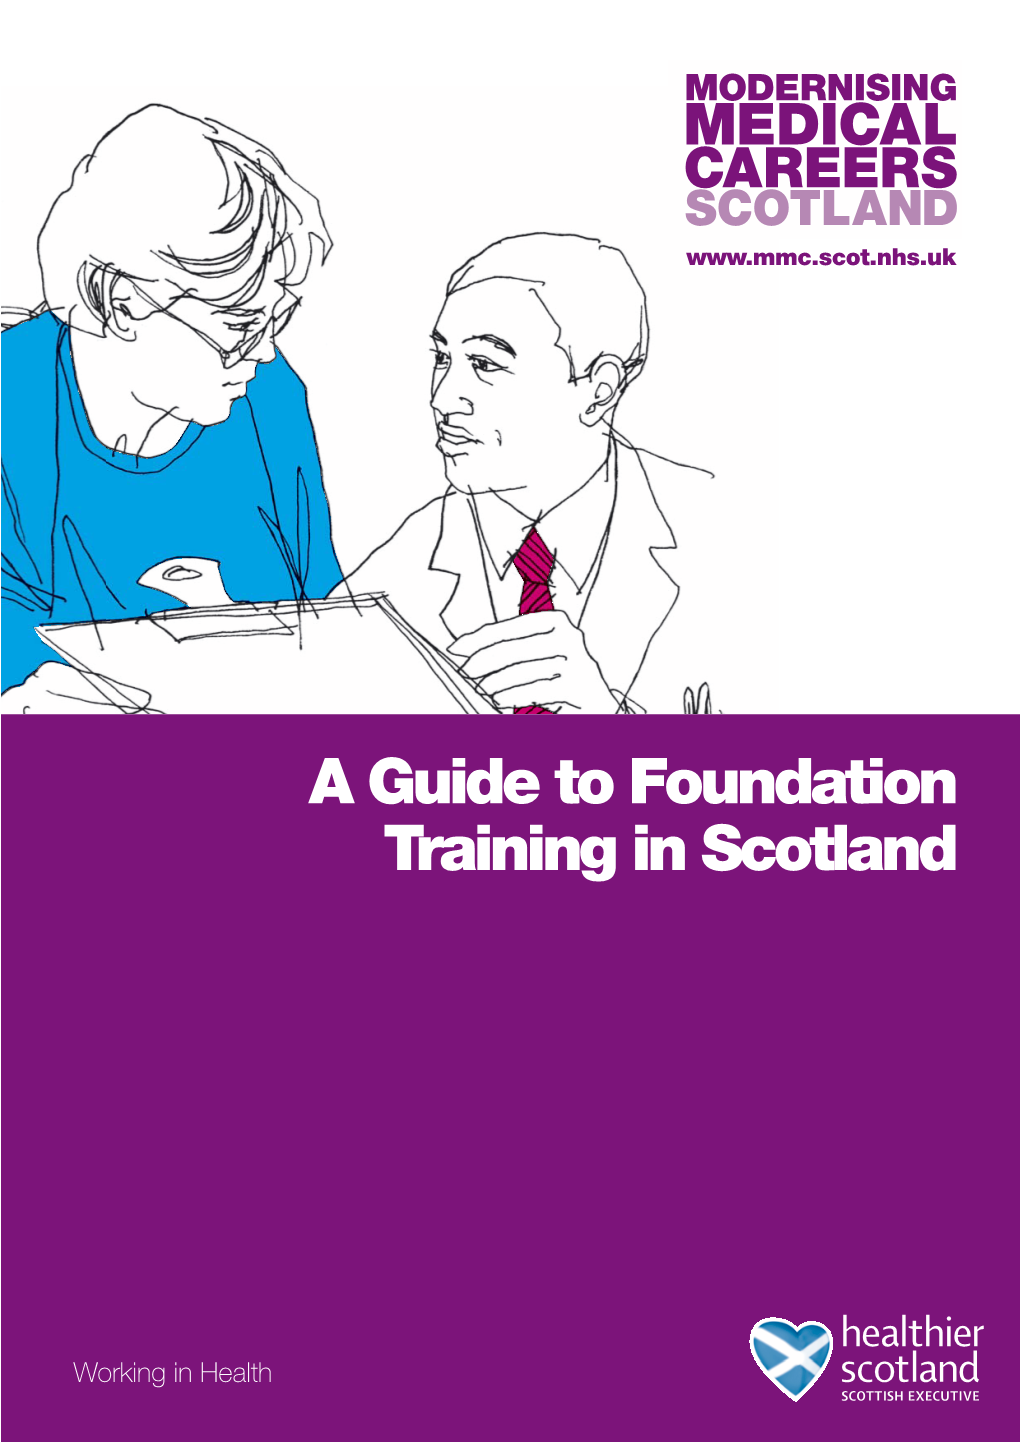 A Guide to Foundation Training in Scotland